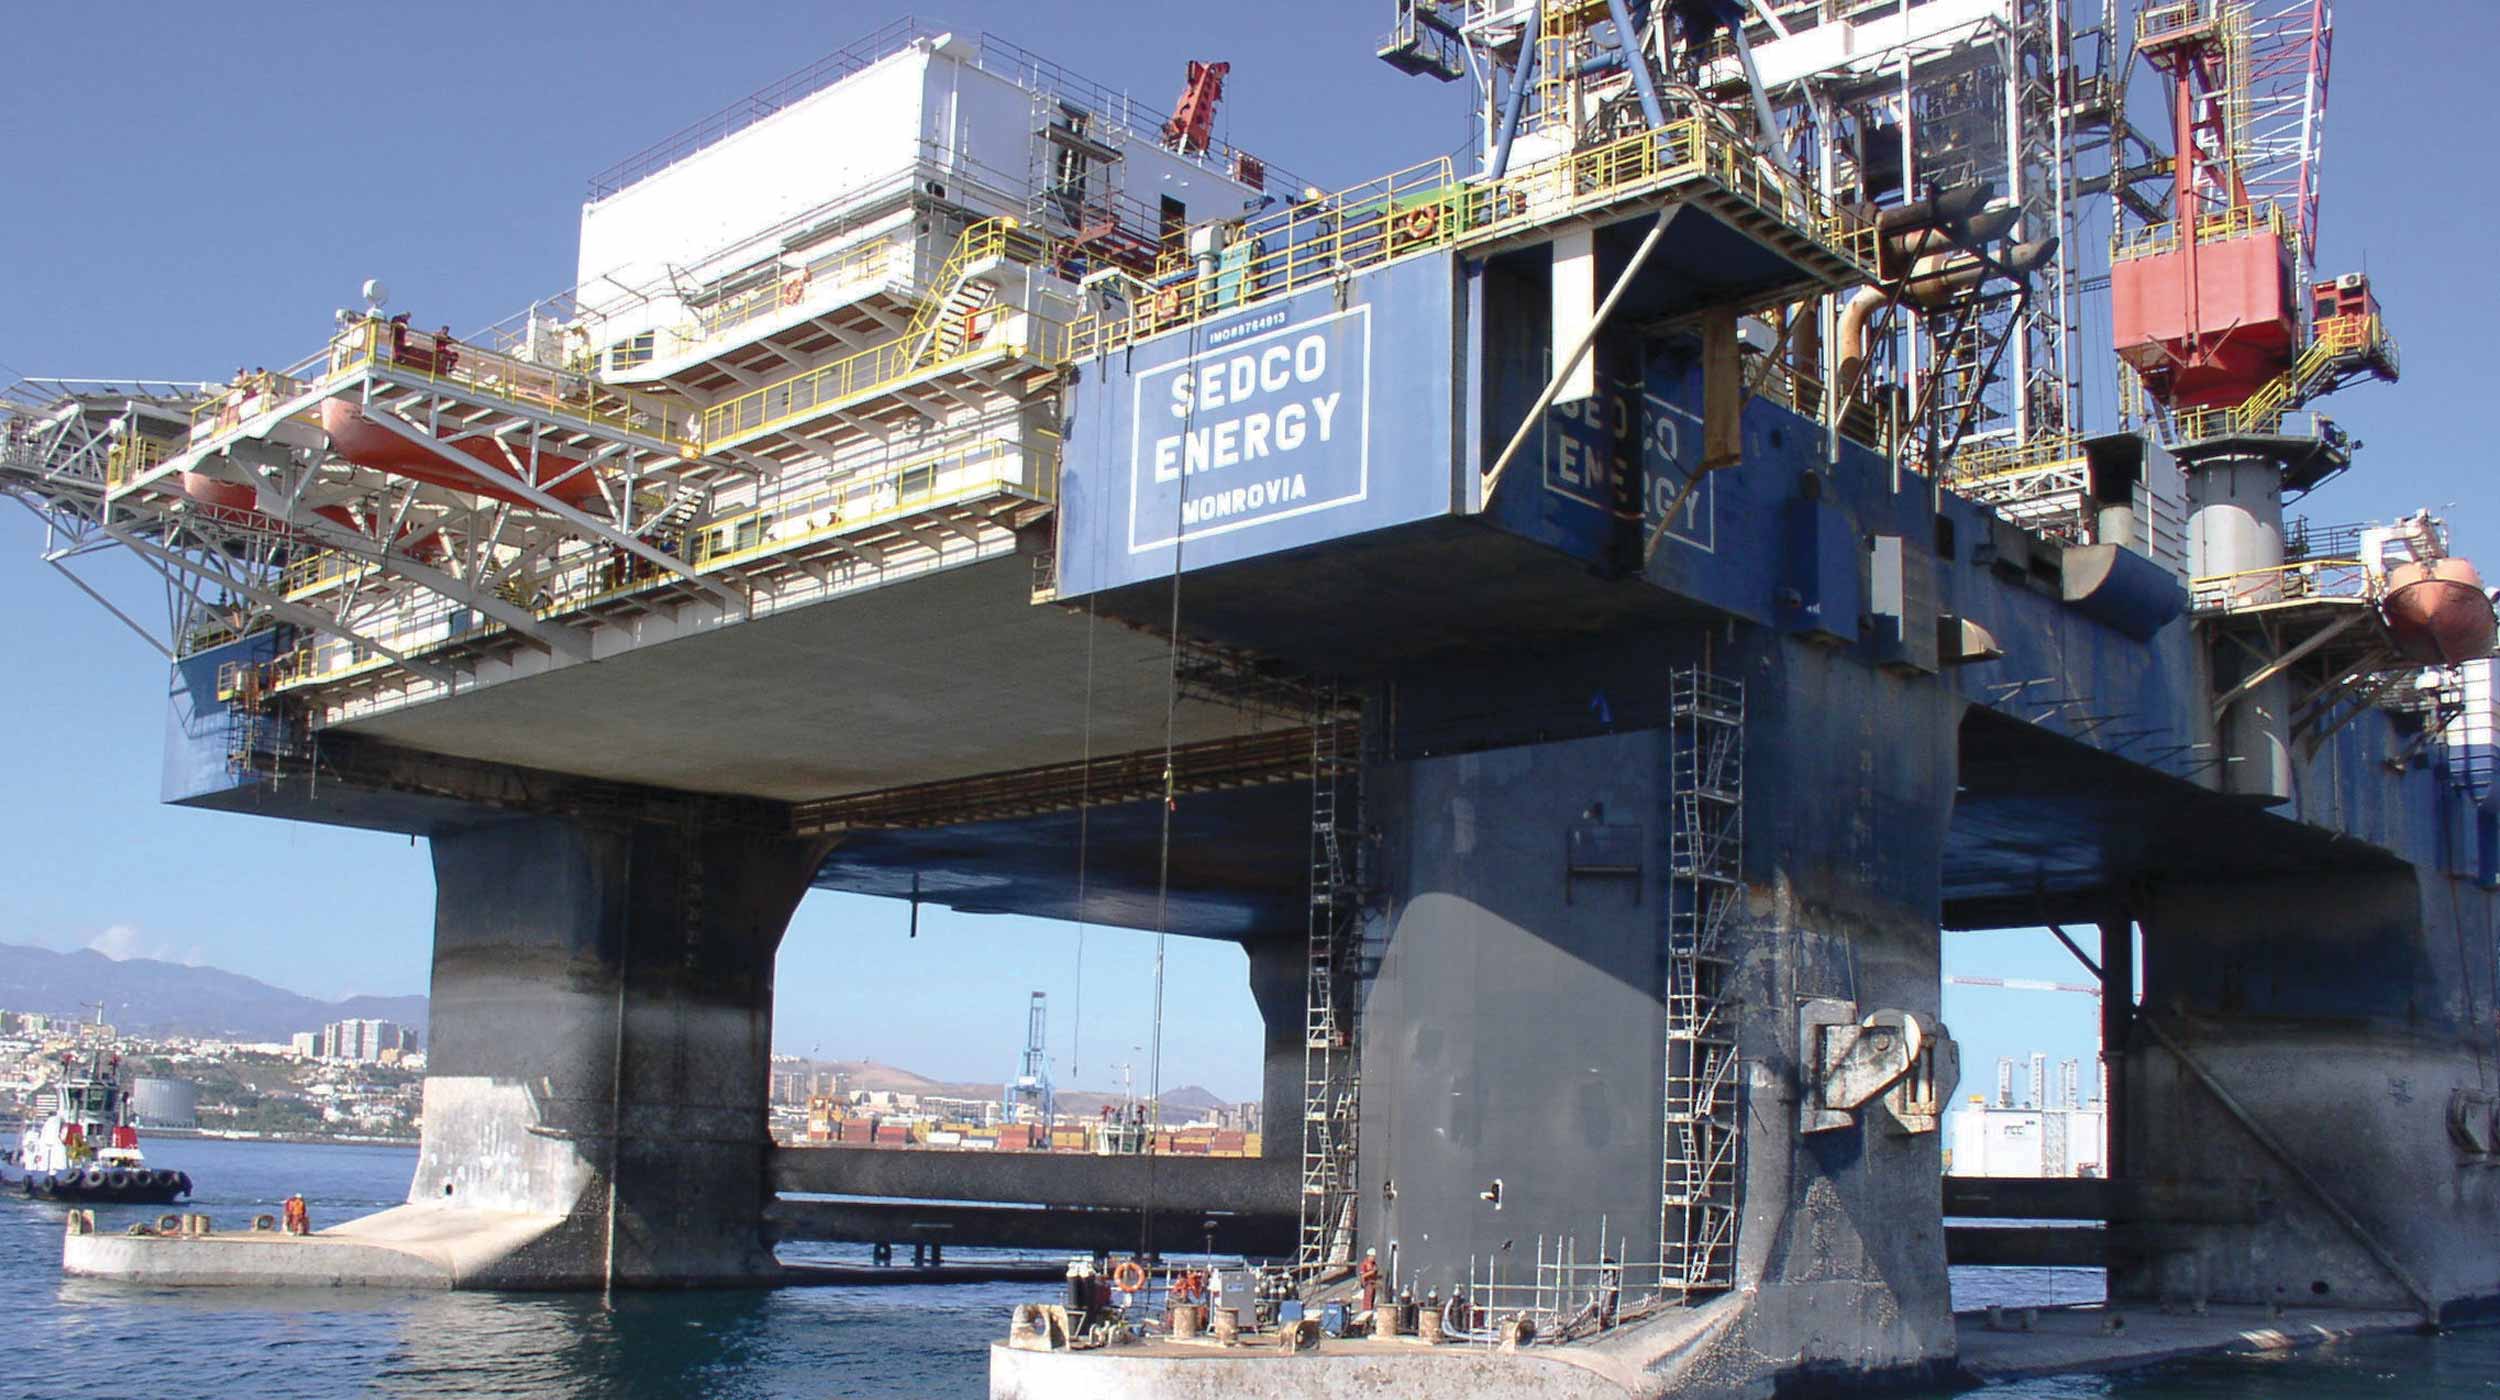 Maintenance of oil platforms performed in Puerto de la Luz and Las Palmas (Gran Canaria) from oil fields in southern Africa.